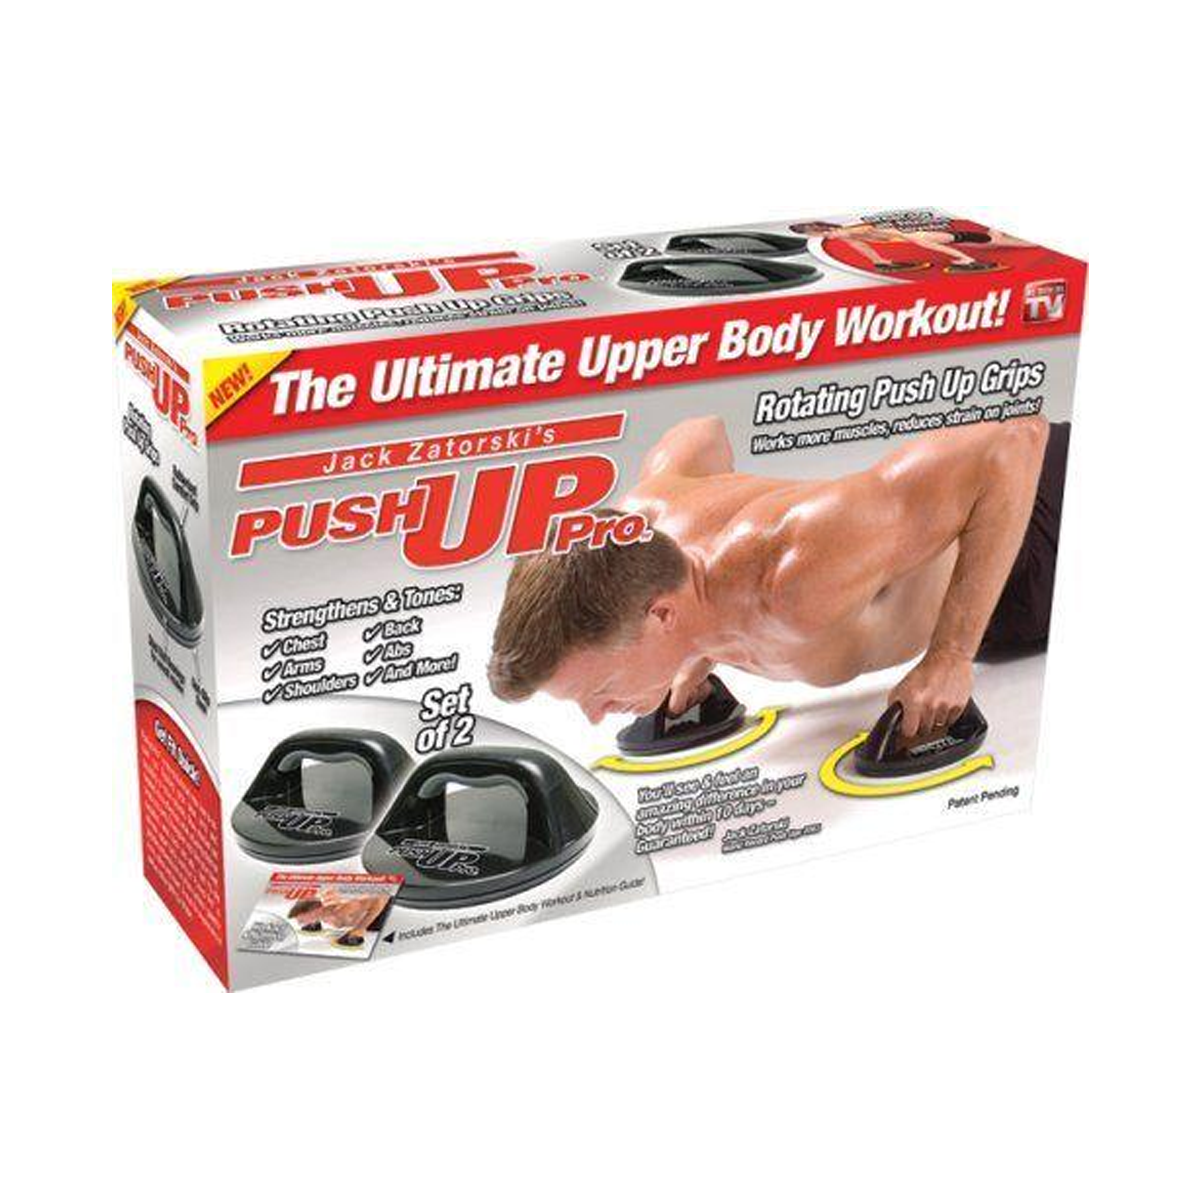 Professional Push Up Pro, The Ultimate Upper Body Workout